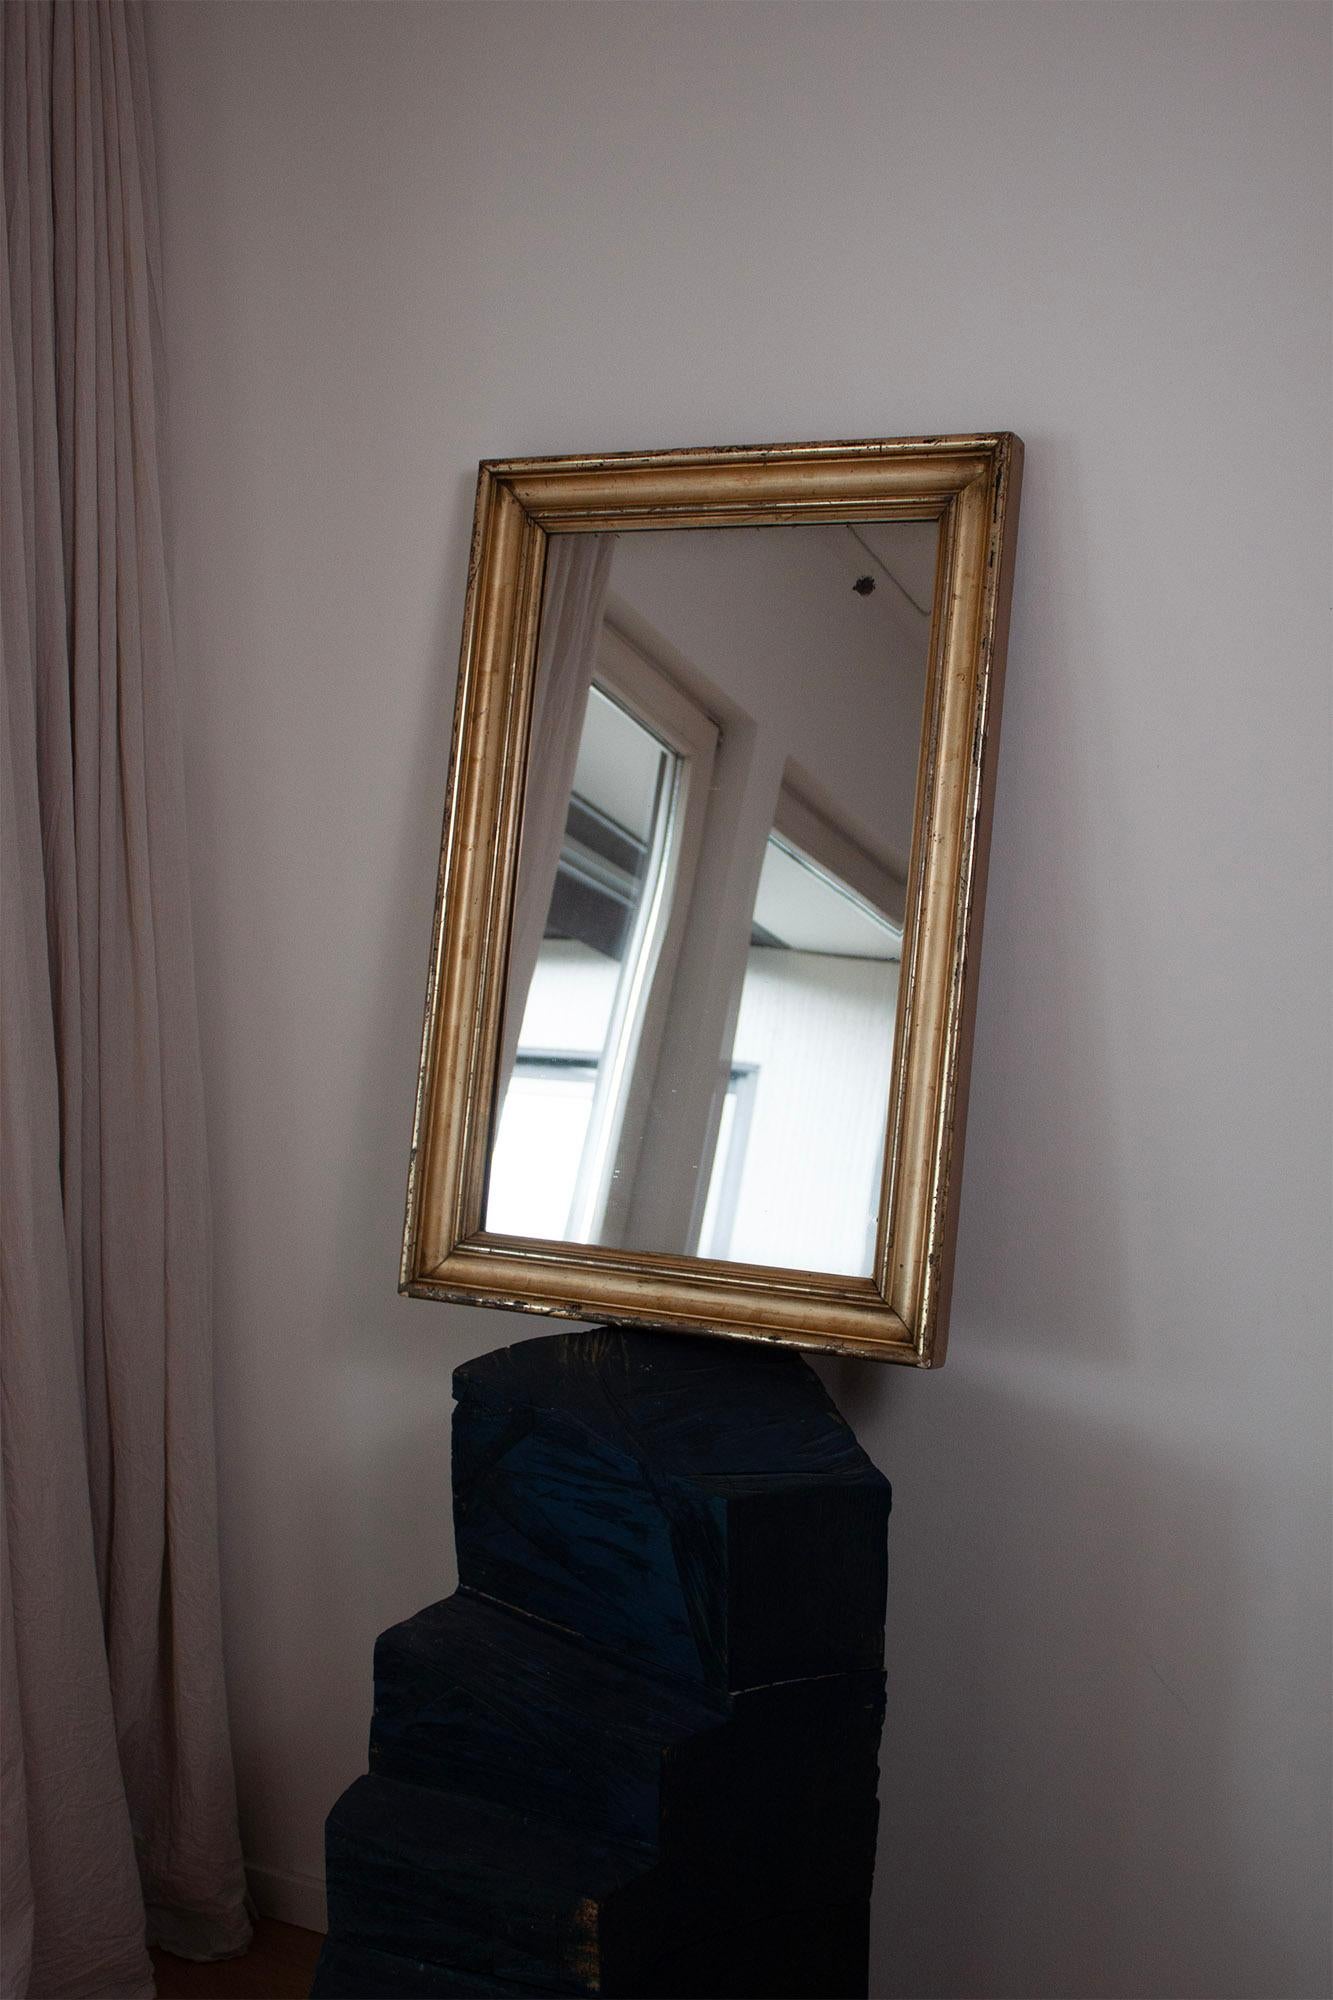 This gilded mirror has still its original mirror plate and wooden frame as well as wooden back panels. This classic design will add an elegant flair to any room. The golden frame, rectangular shape and generous dimensions make it the focal point of